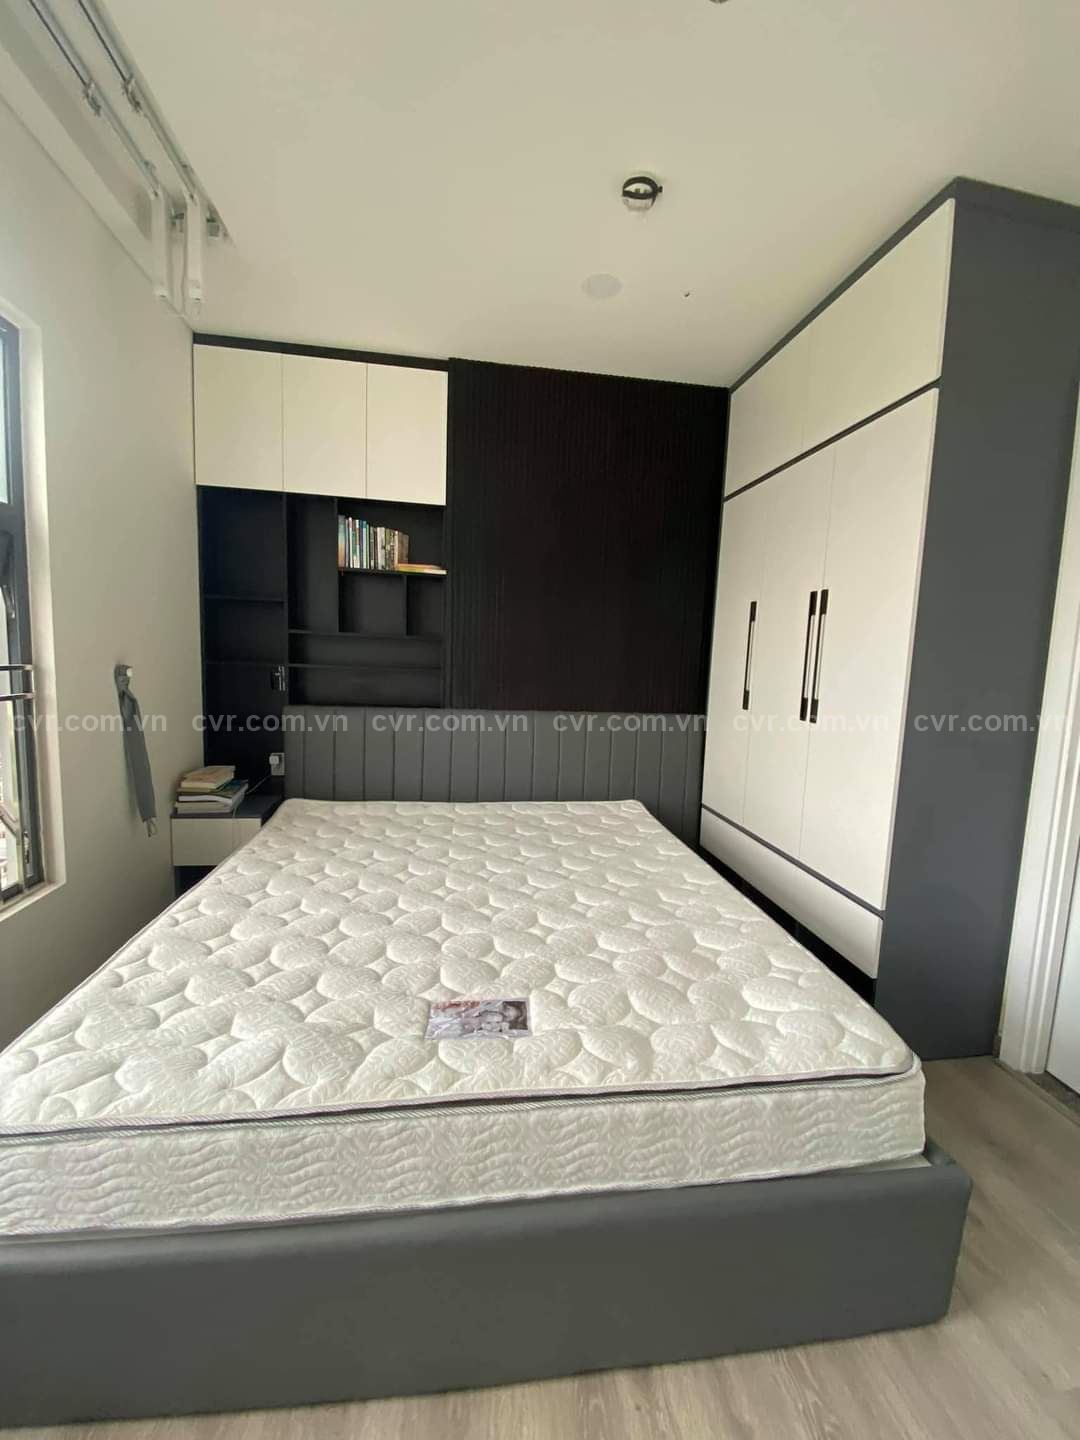 2 Bedroom Apartment For Rent In Monarchy B - Ảnh 2